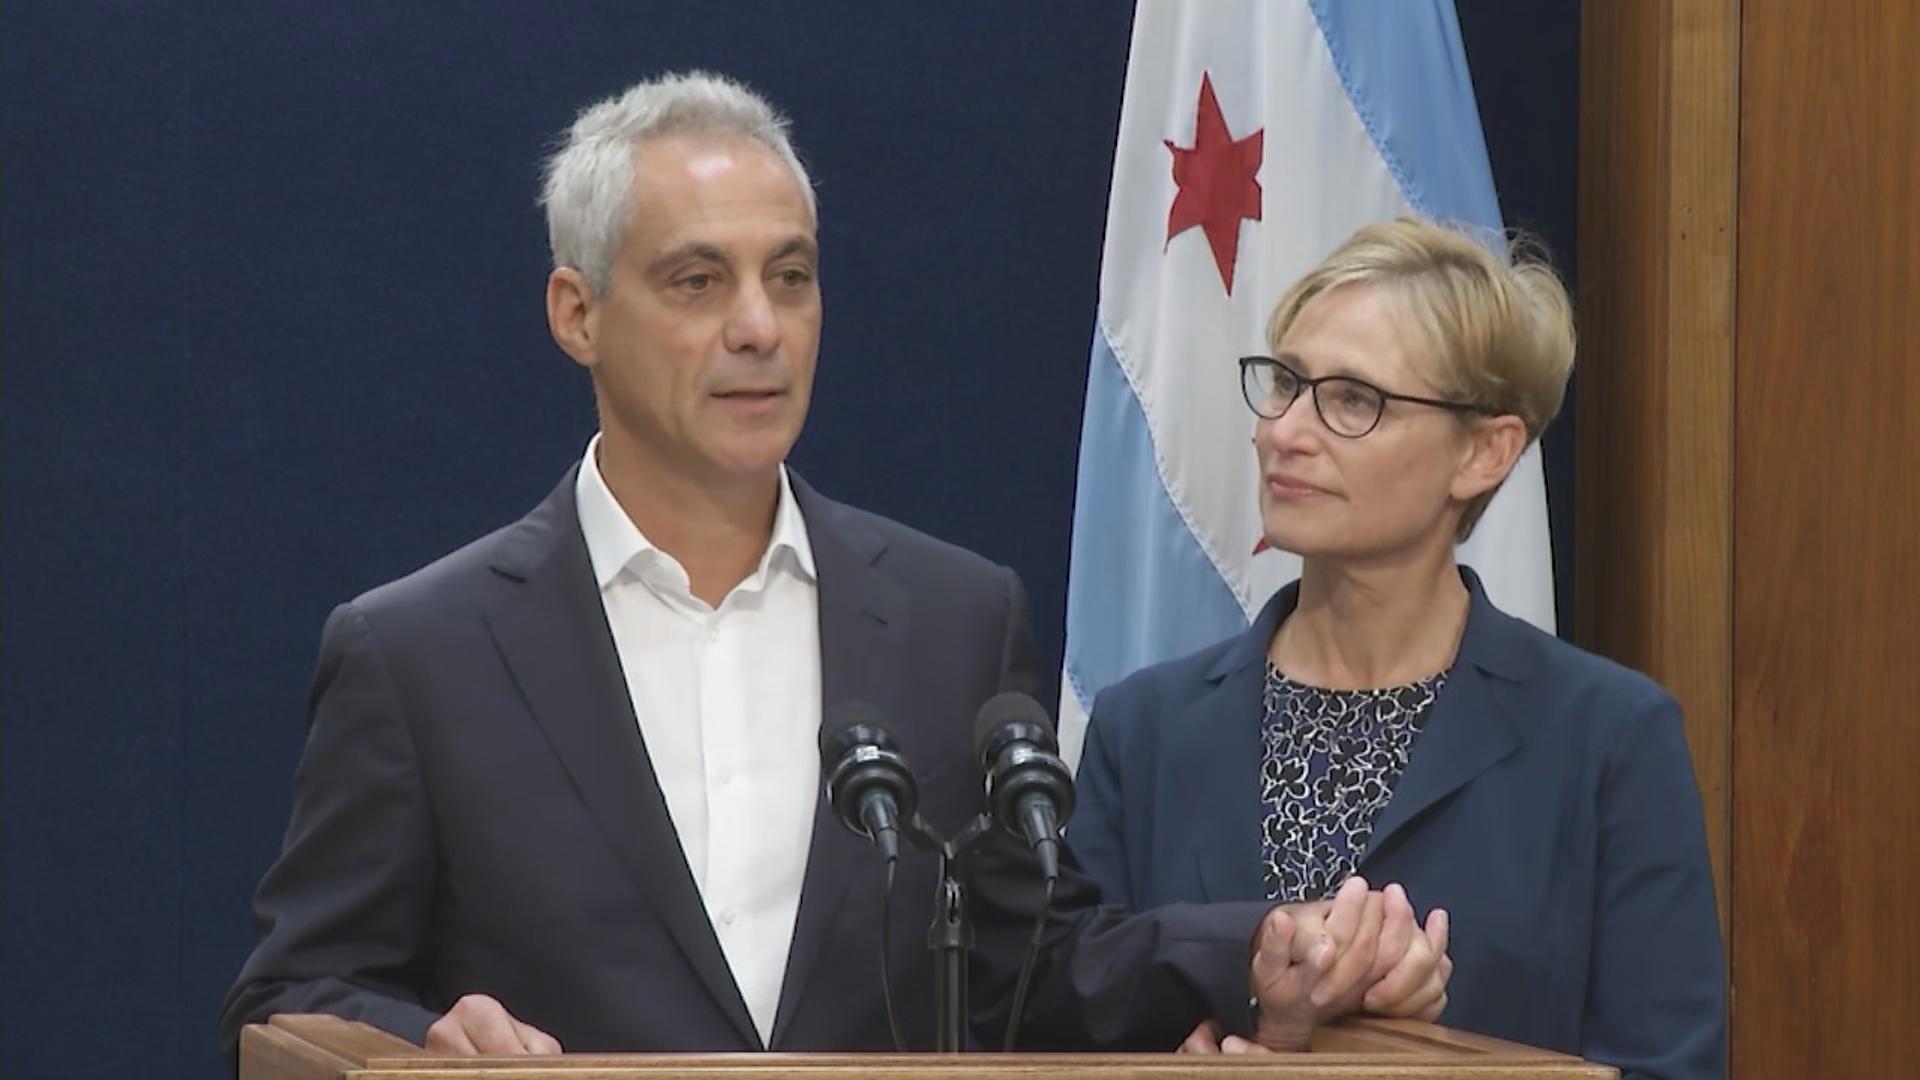 “Now with our three children in college, Amy and I have decided it is time to write another chapter together,” Mayor Rahm Emanuel said Sept. 4, 2018 with his wife Amy Rule by his side as he announced he would not seek reelection. (WTTW News)